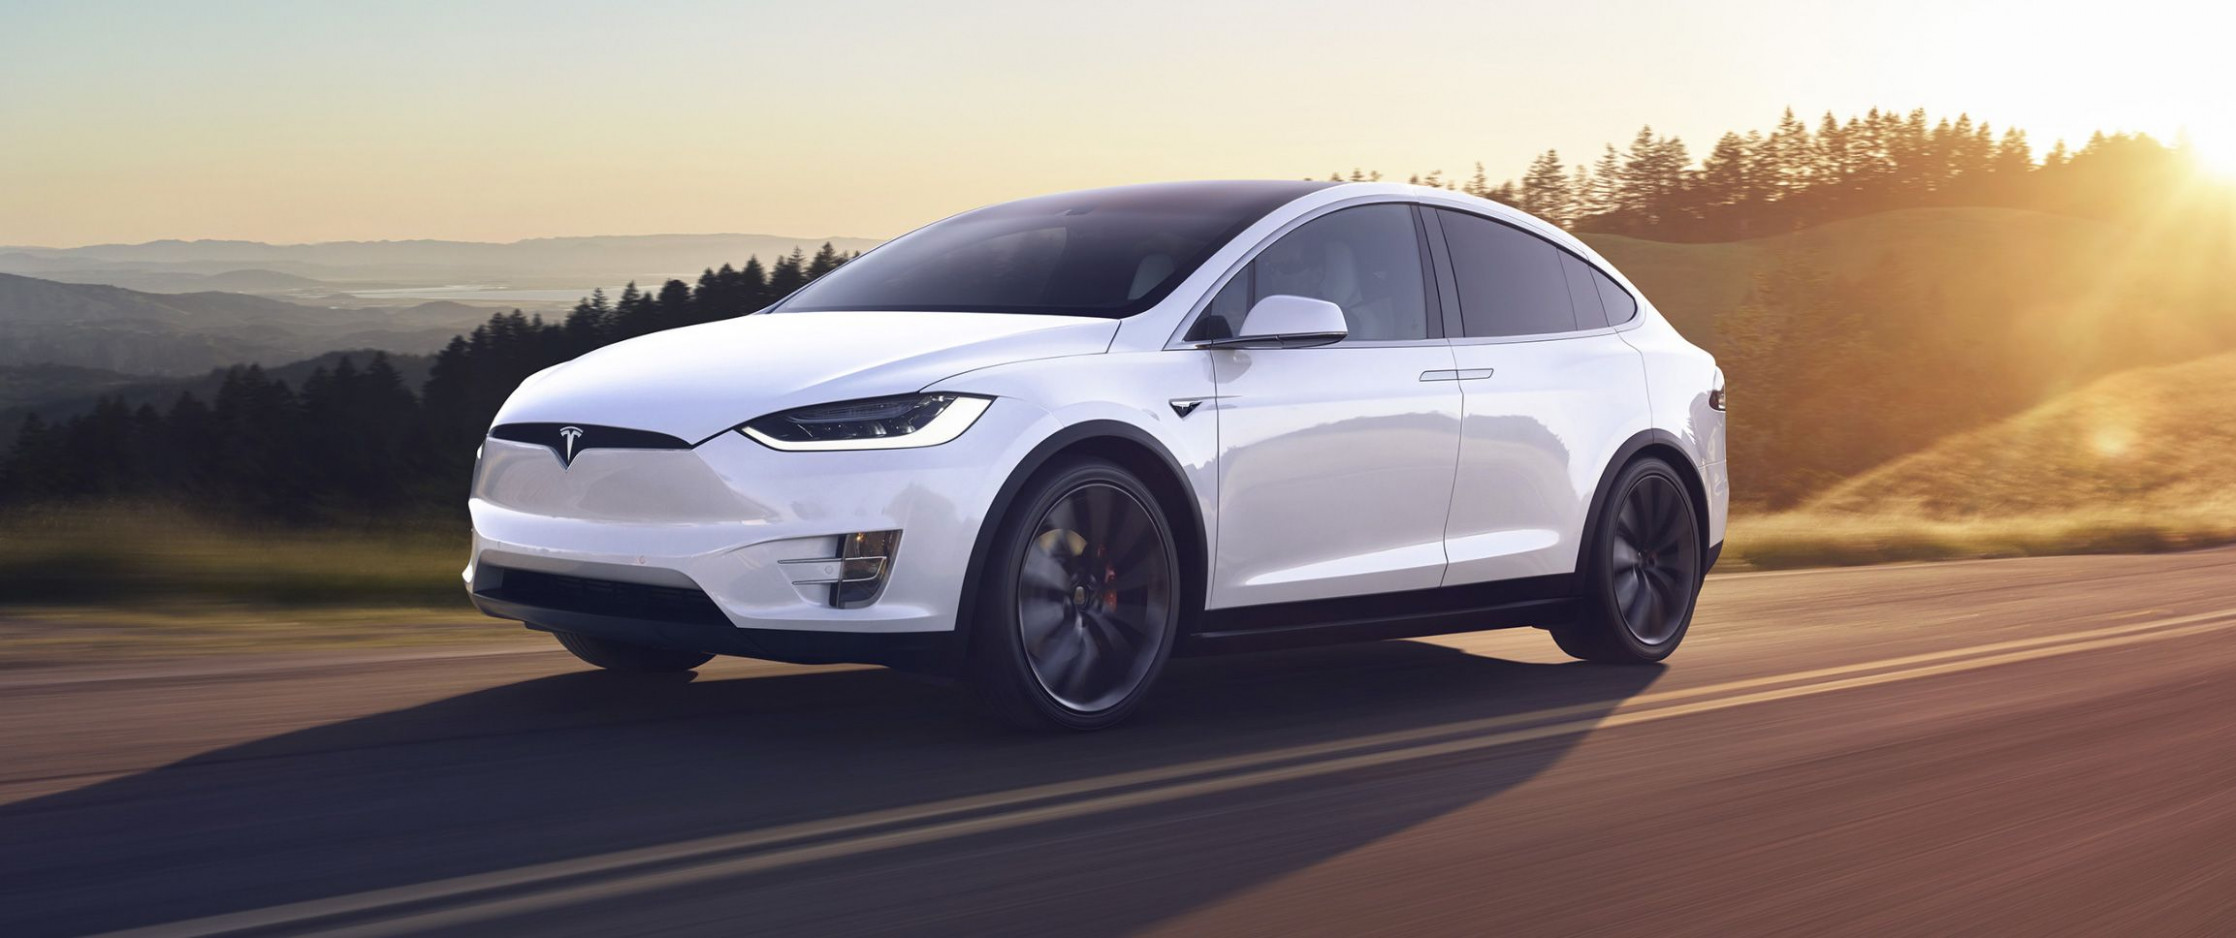 4 Tesla Model X Review, Pricing, And Specs Price For Tesla Model X